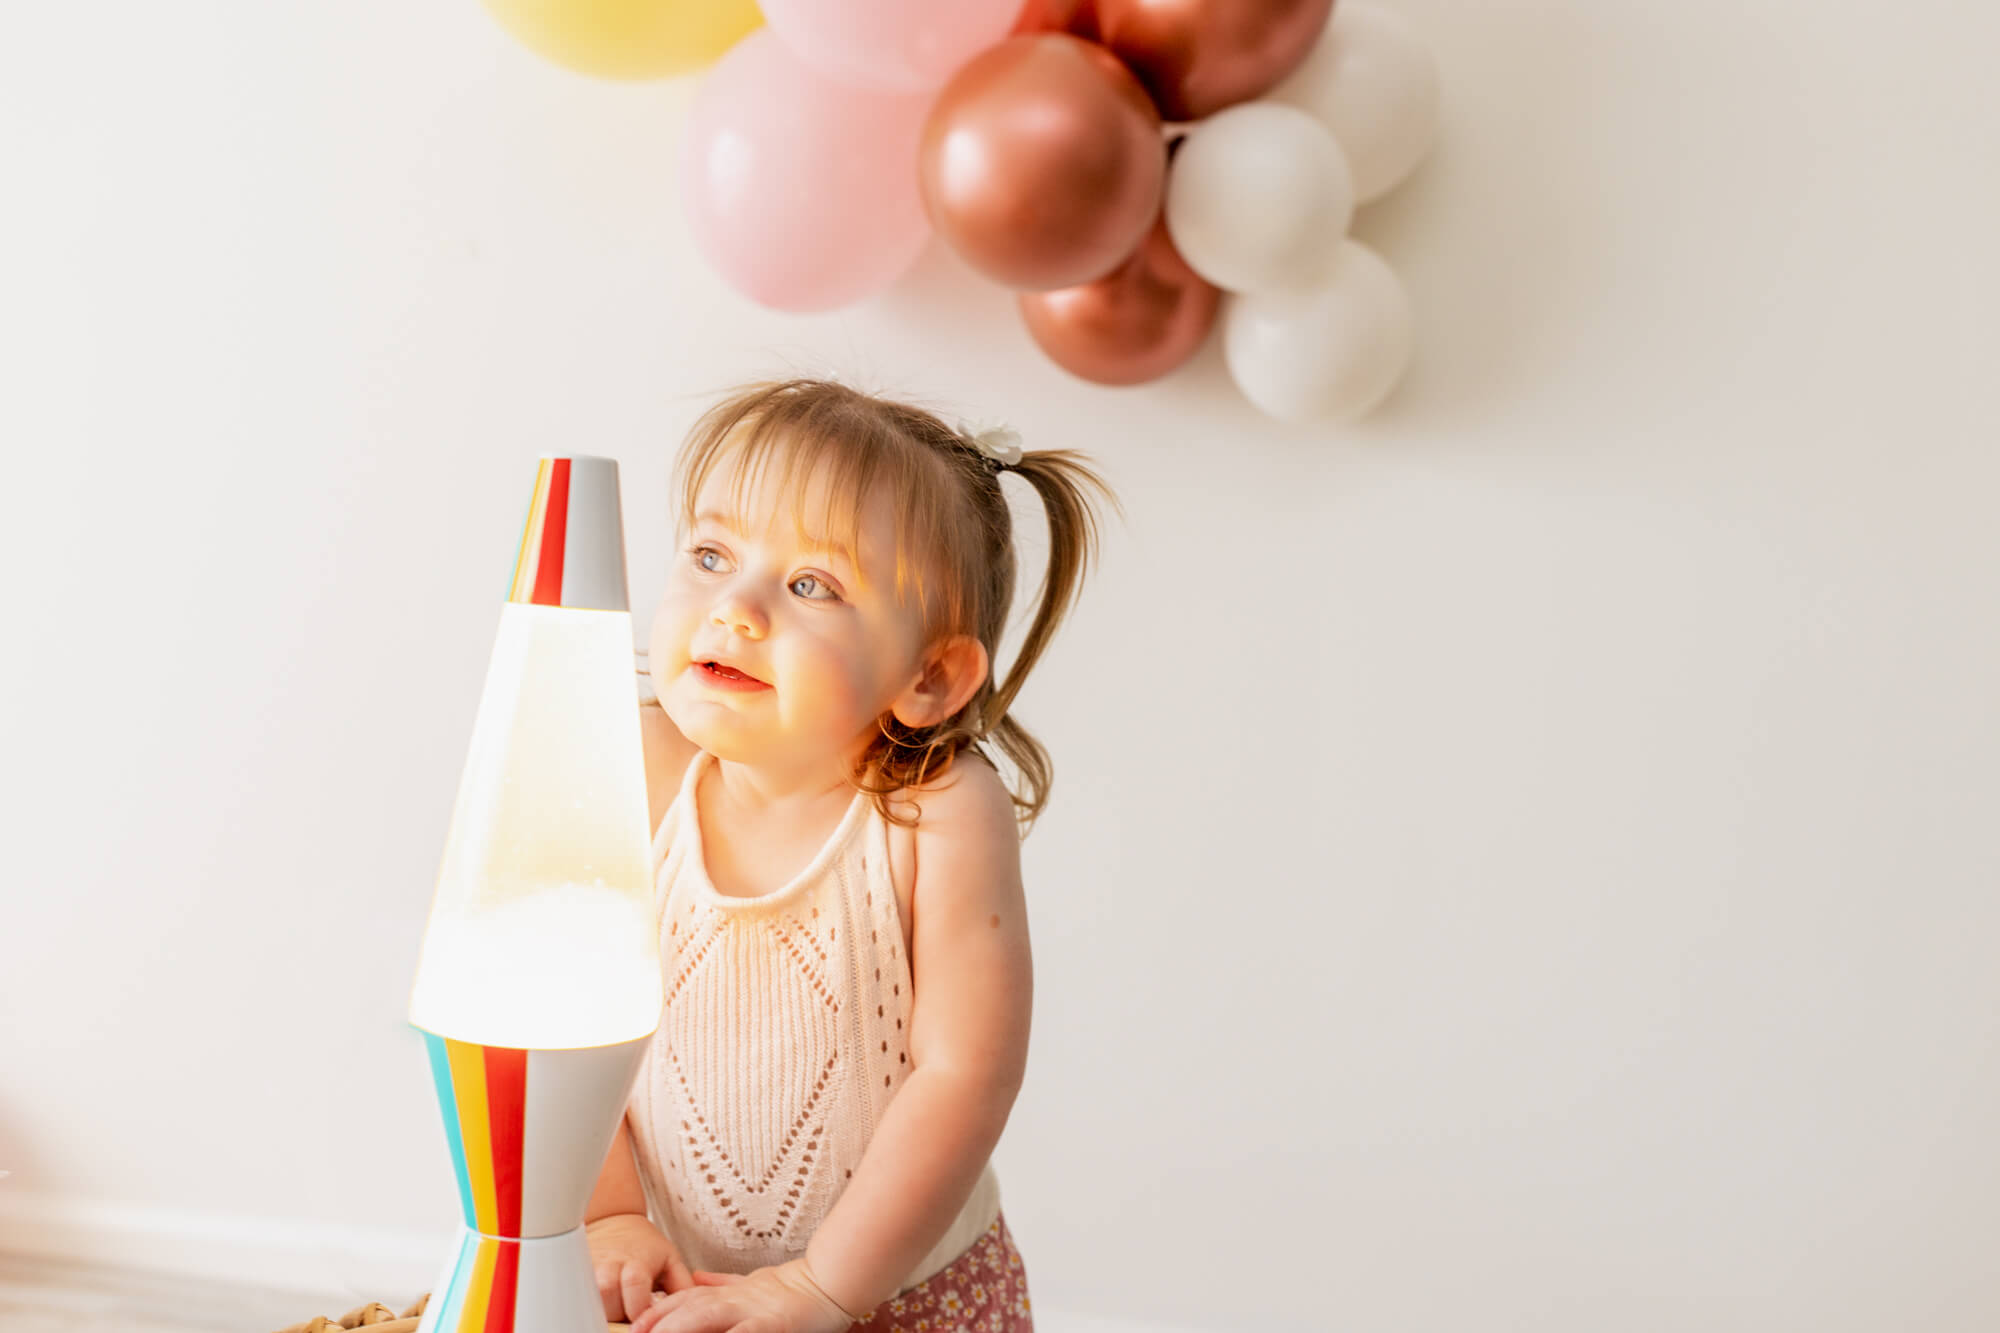 little girl in white shirt and pigtails looking at a lava lamp